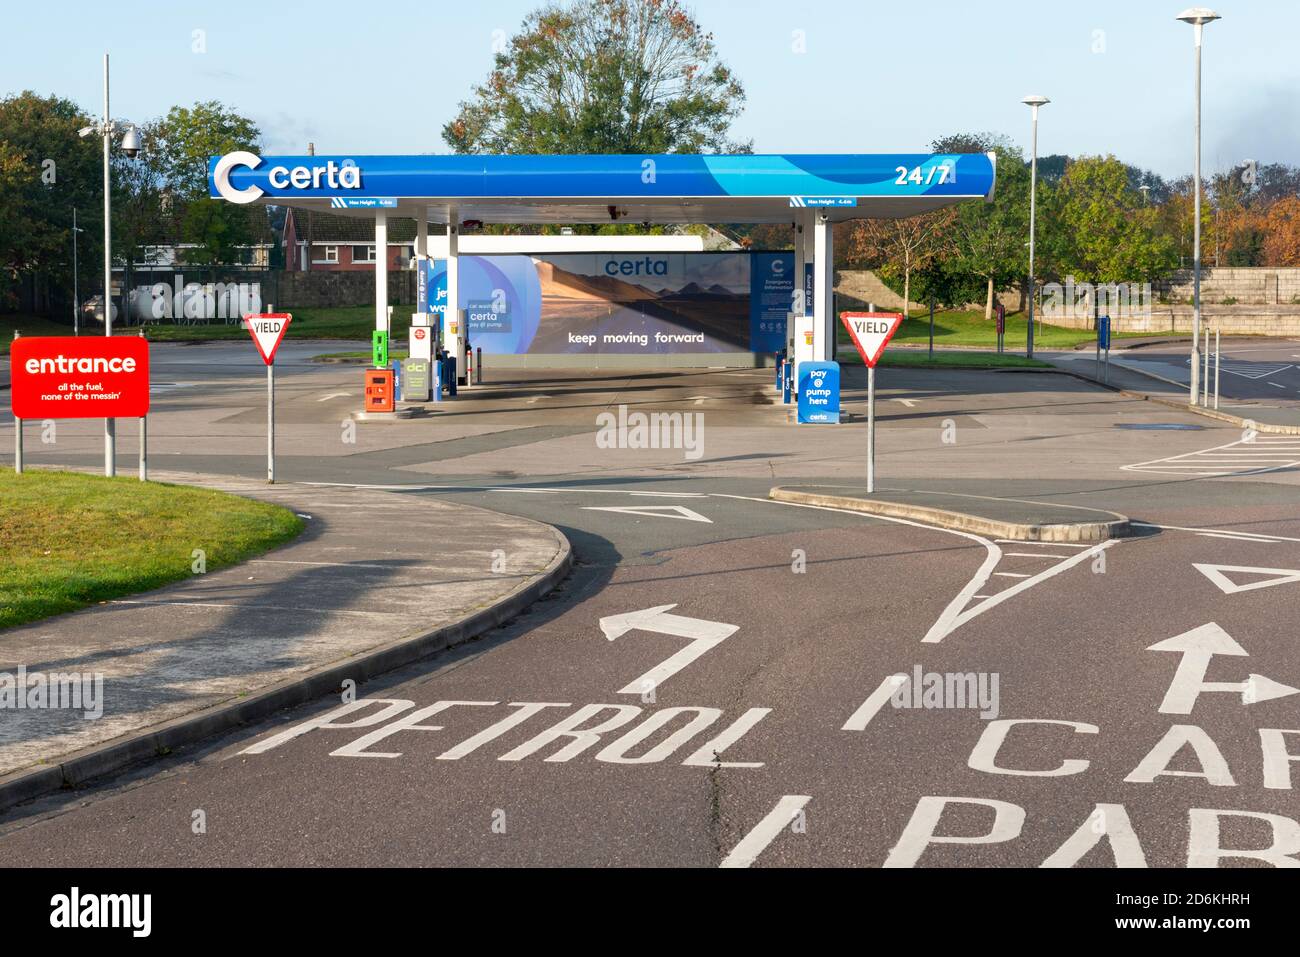 Certa filling station by DCC Plc or gas station or petrol station pay at pump fourcourt new network at DeerPark in Killarney, County Kerry, Ireland Stock Photo